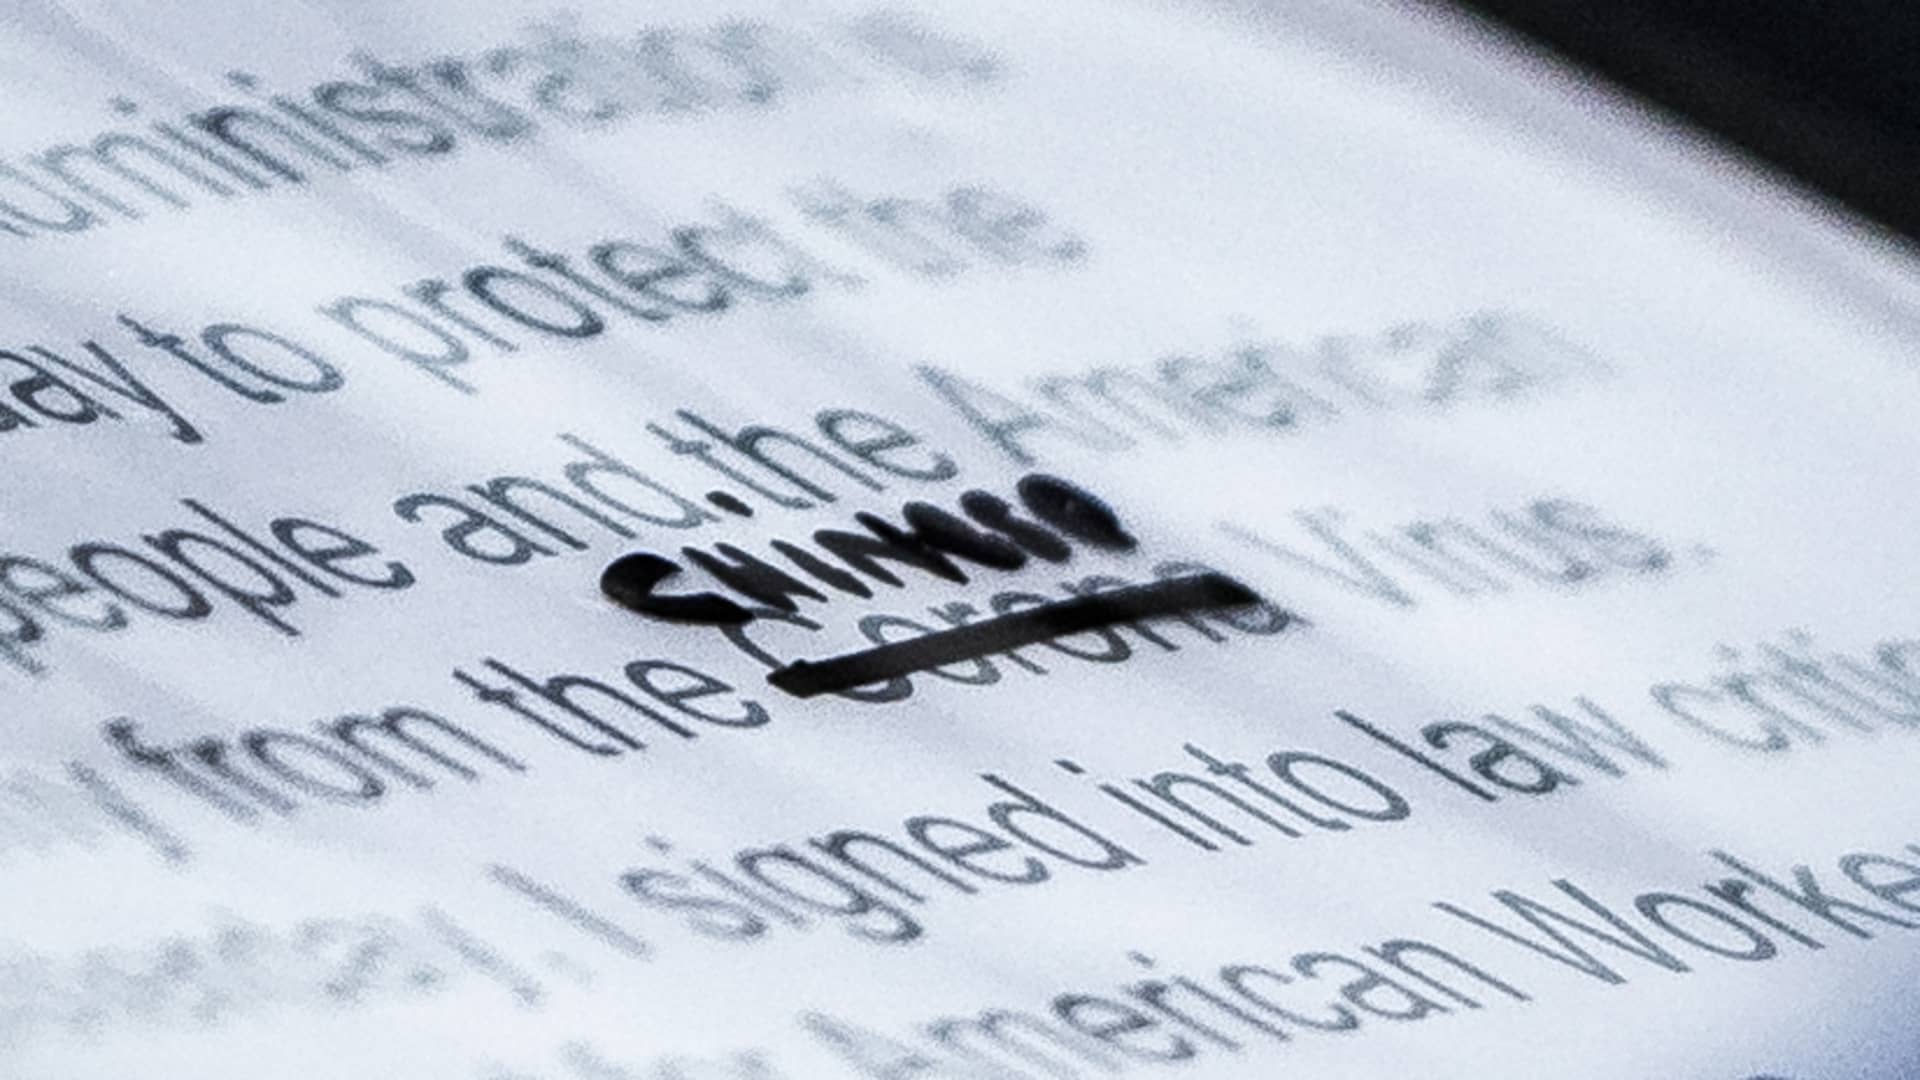 A close-up of President Donald Trump's notes shows where Corona was crossed out and replaced with Chinese Virus as he speaks during a White House briefing, March 19, 2020.